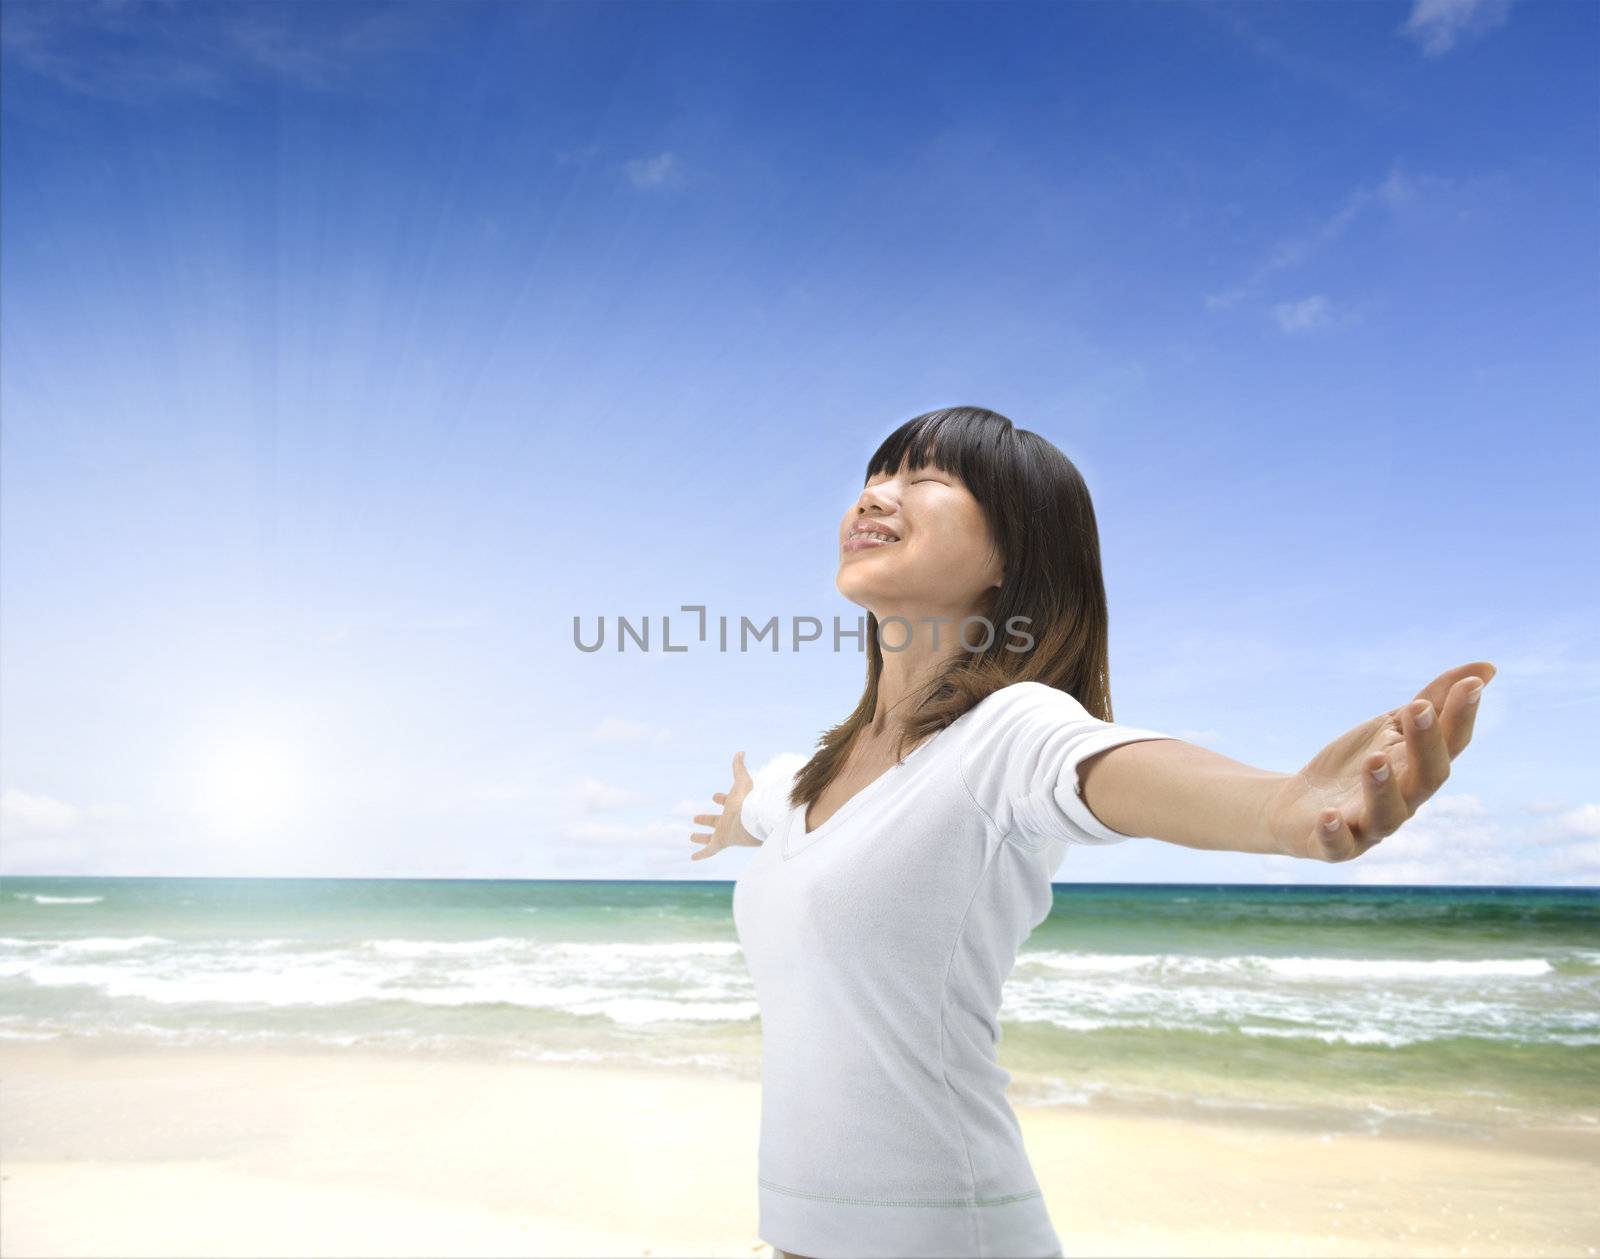 asian girl freedom relaxation concept photo on a beach